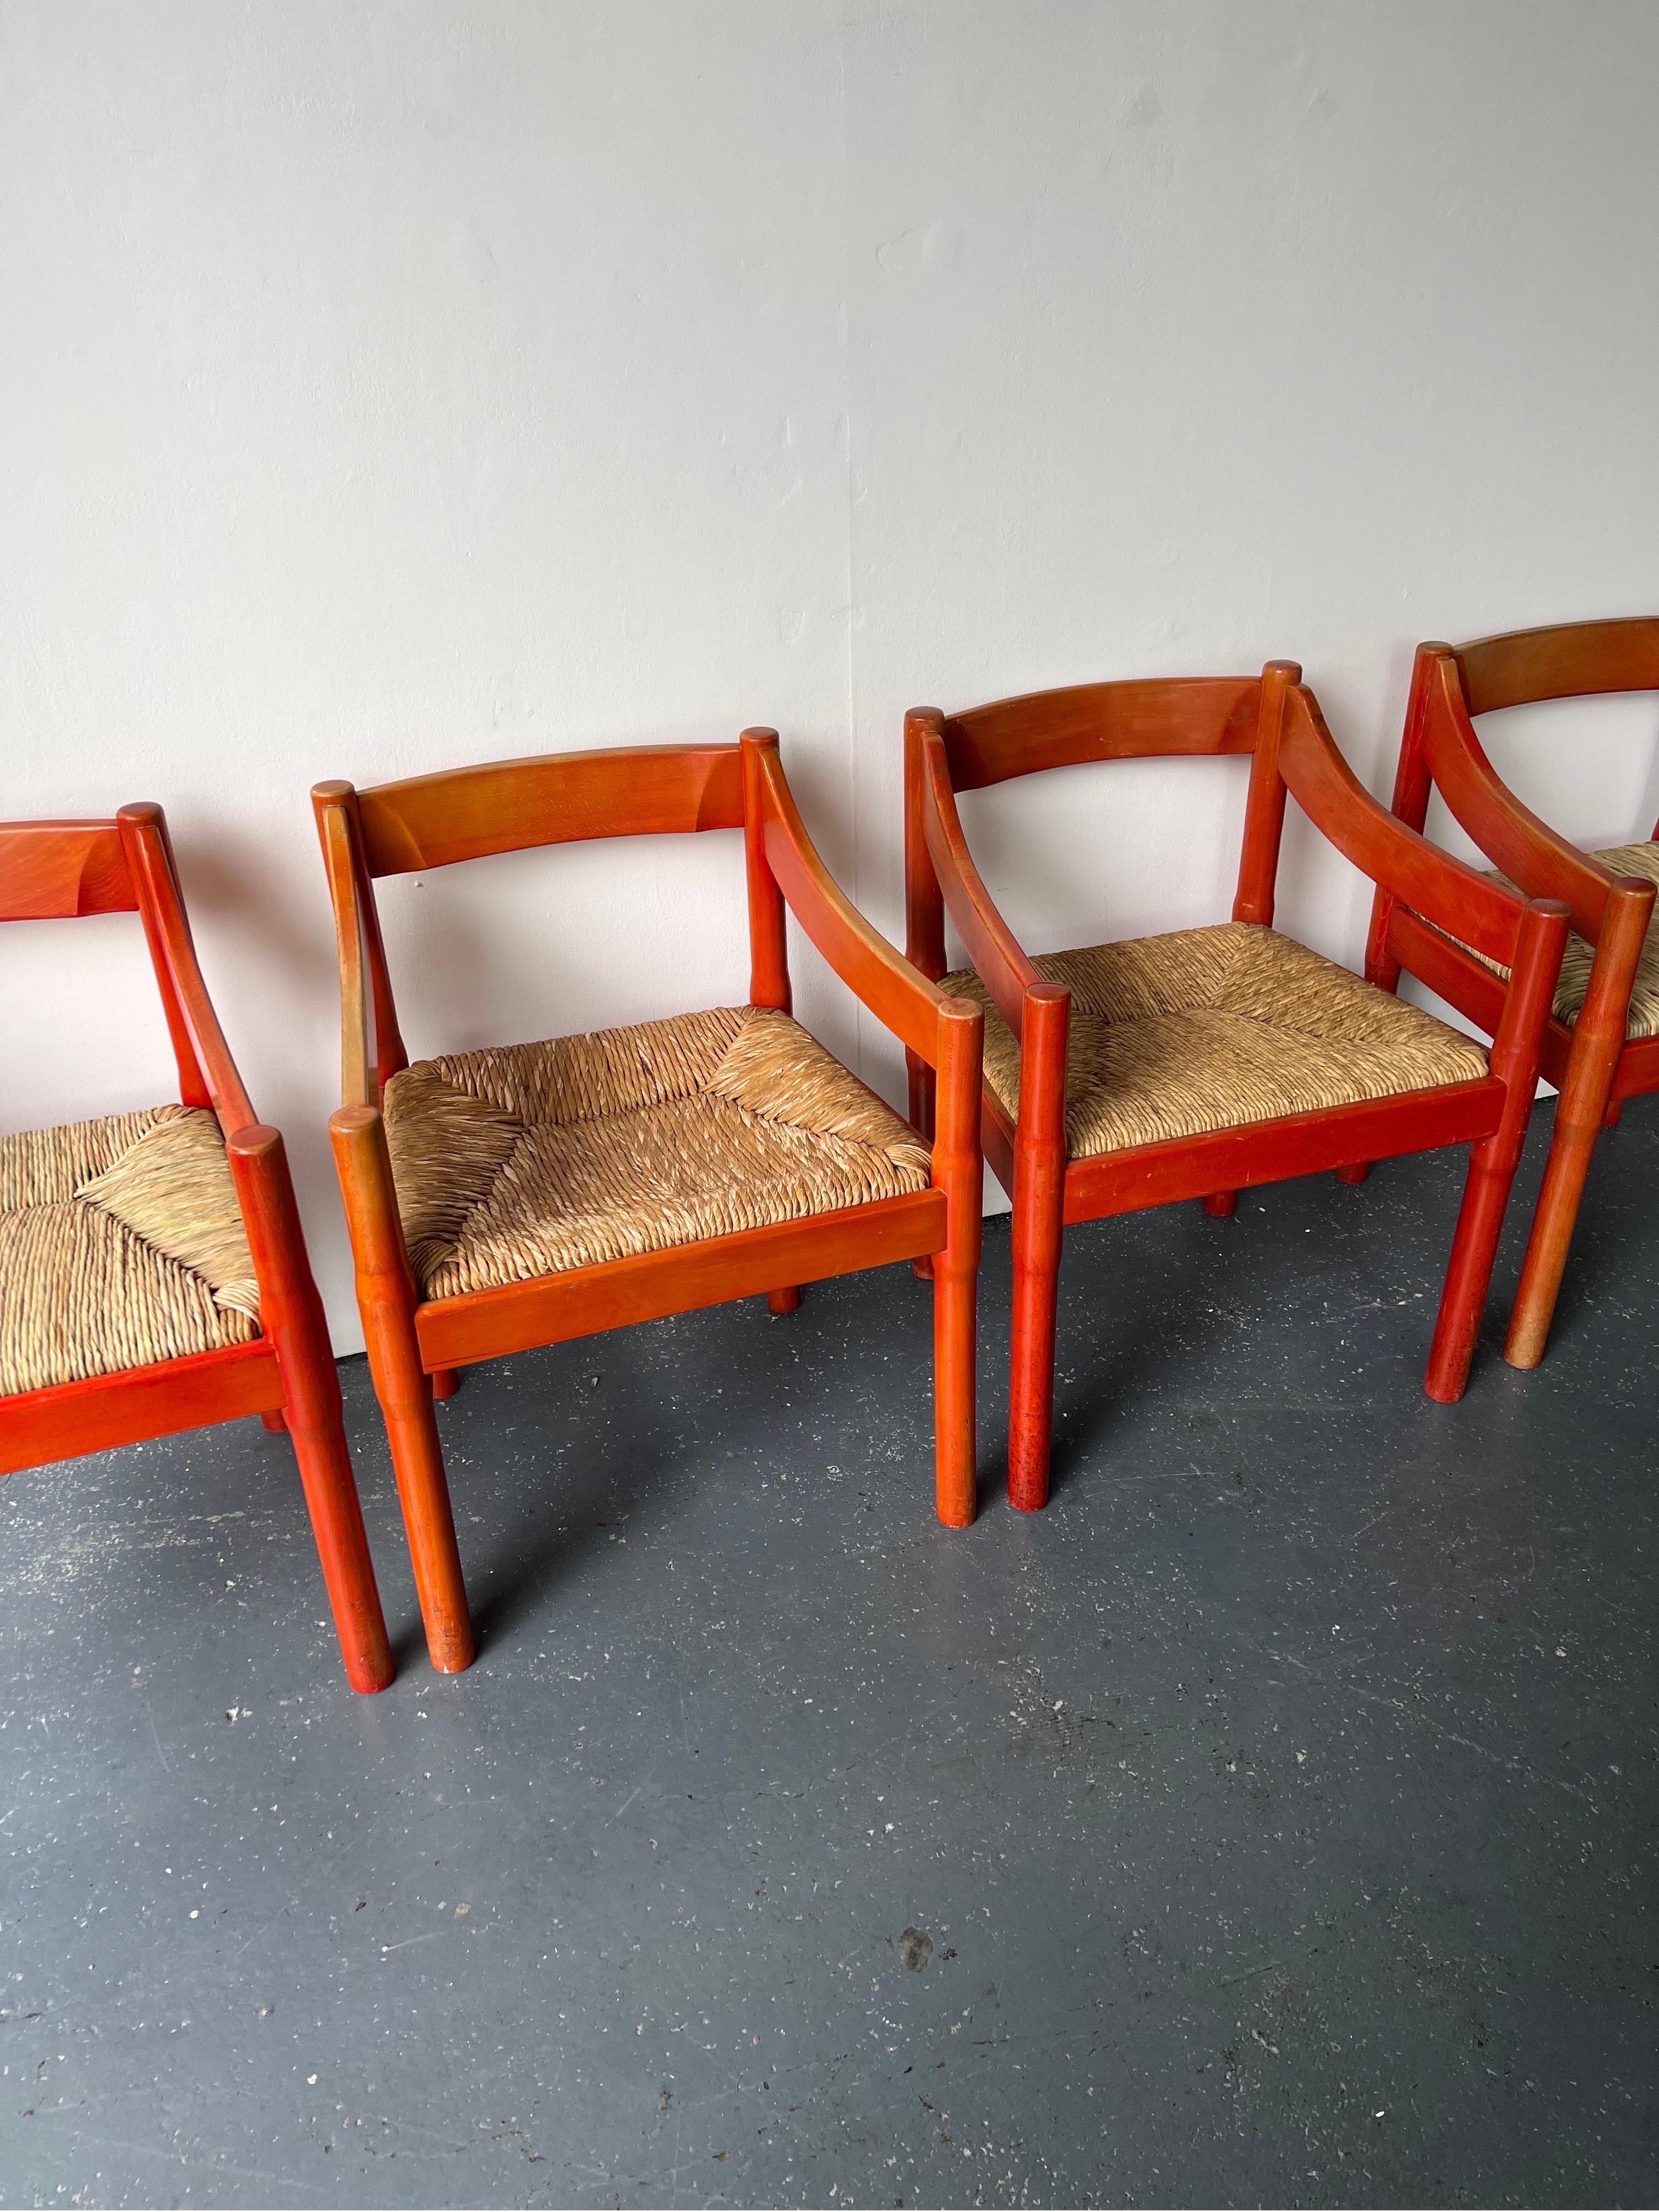 Charming set of x2 red-stained Beech Carimate chairs designed by architect and designer Vico Magistretti. These chairs have their original red stain from the 1960s which has faded in places and the fading may appear more so in certain areas than